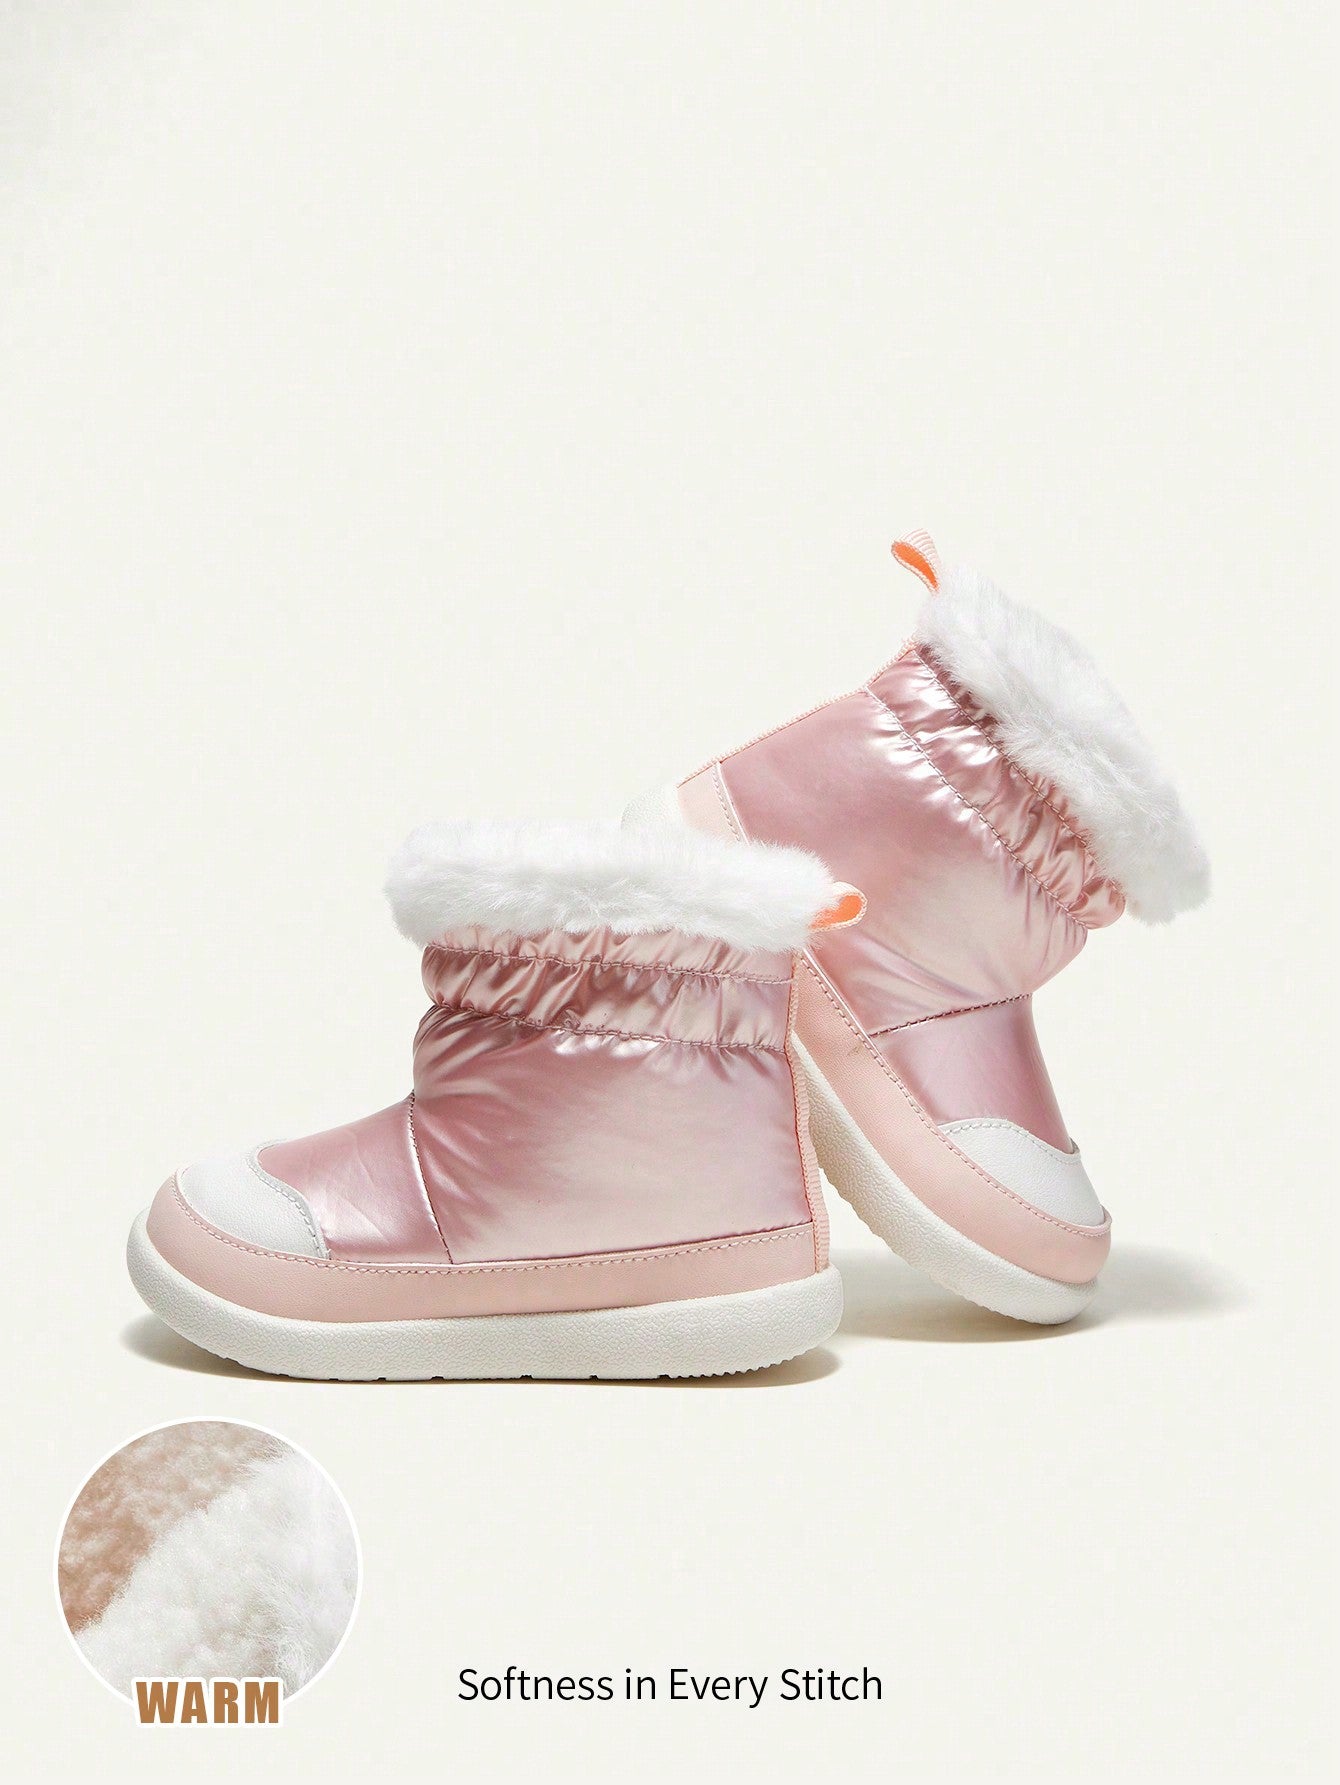 Girls' Pink Fashionable Fleece Lined Snow Boots With Trendy Design For Comfort And Warmth